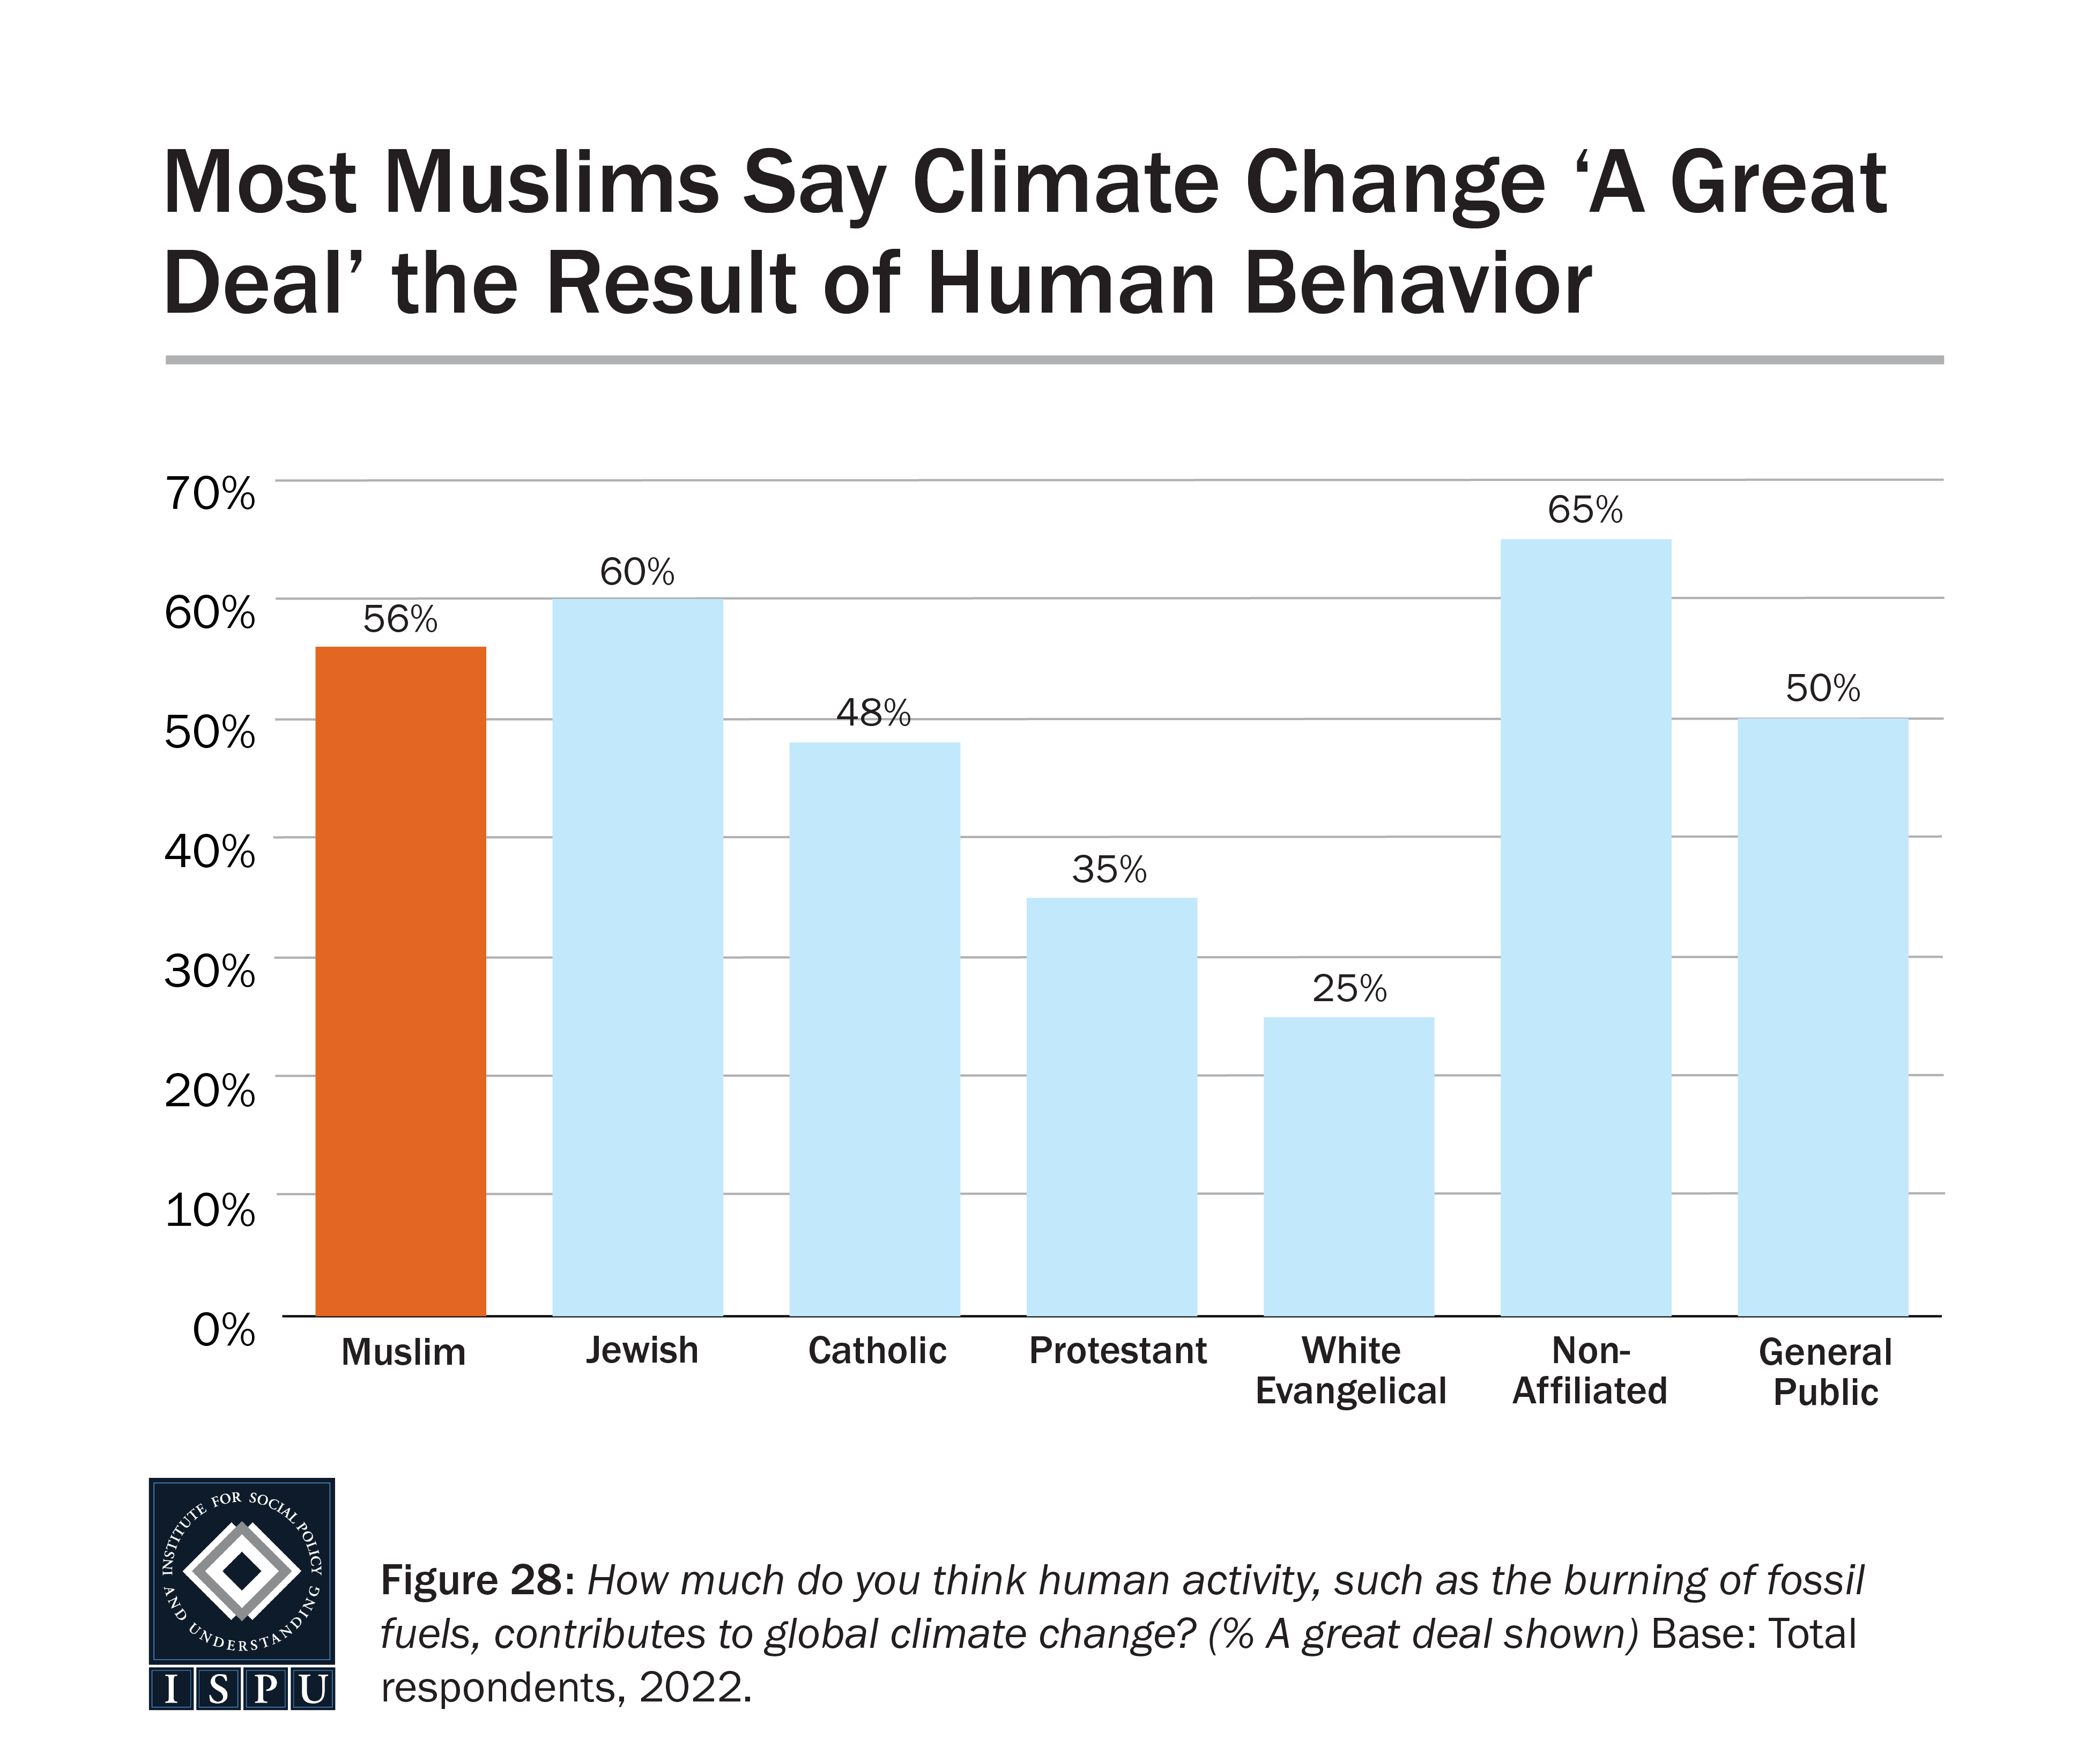 A bar graph showing the proportion of all groups surveyed who attribute climate change “a great deal” to human activity.